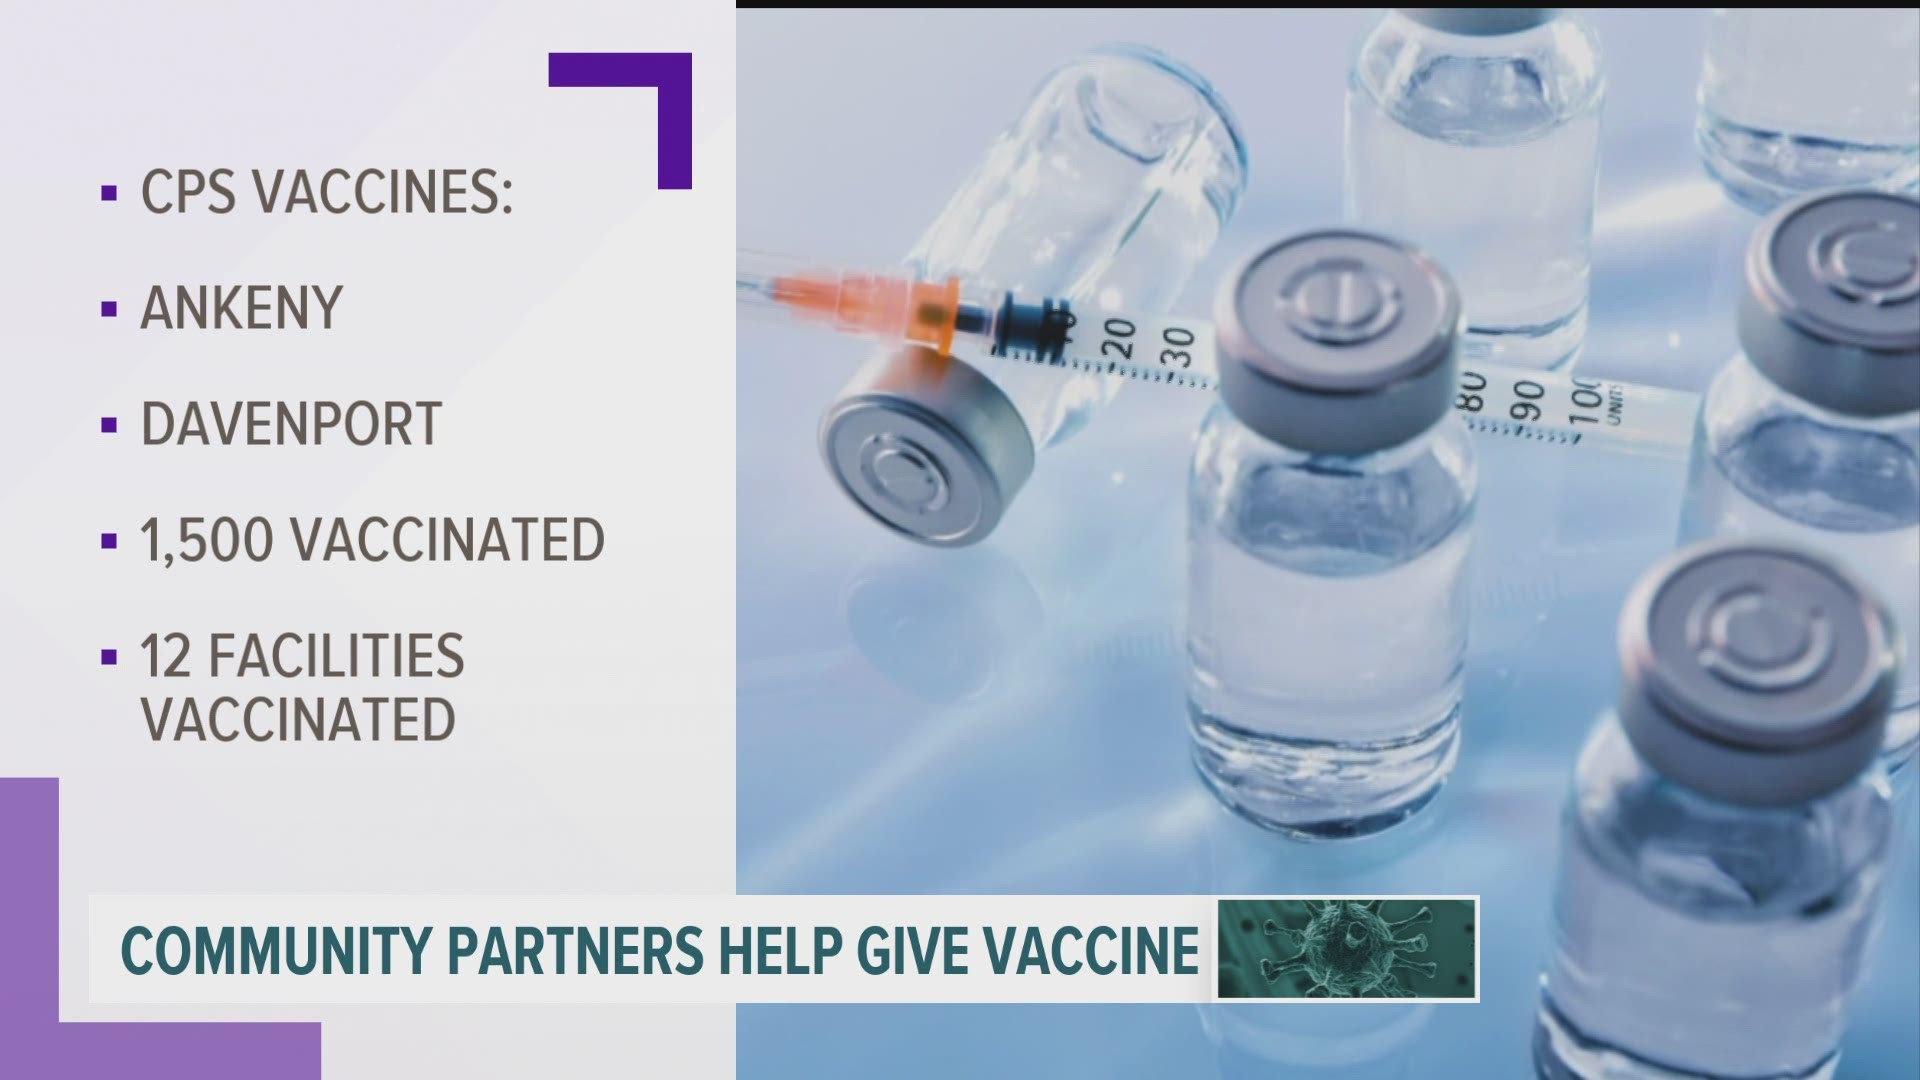 CVS Pharmacy, Walgreens, and Community Pharmacy Services are working together to provide the vaccine to residents, staff at nursing and assisted living facilities